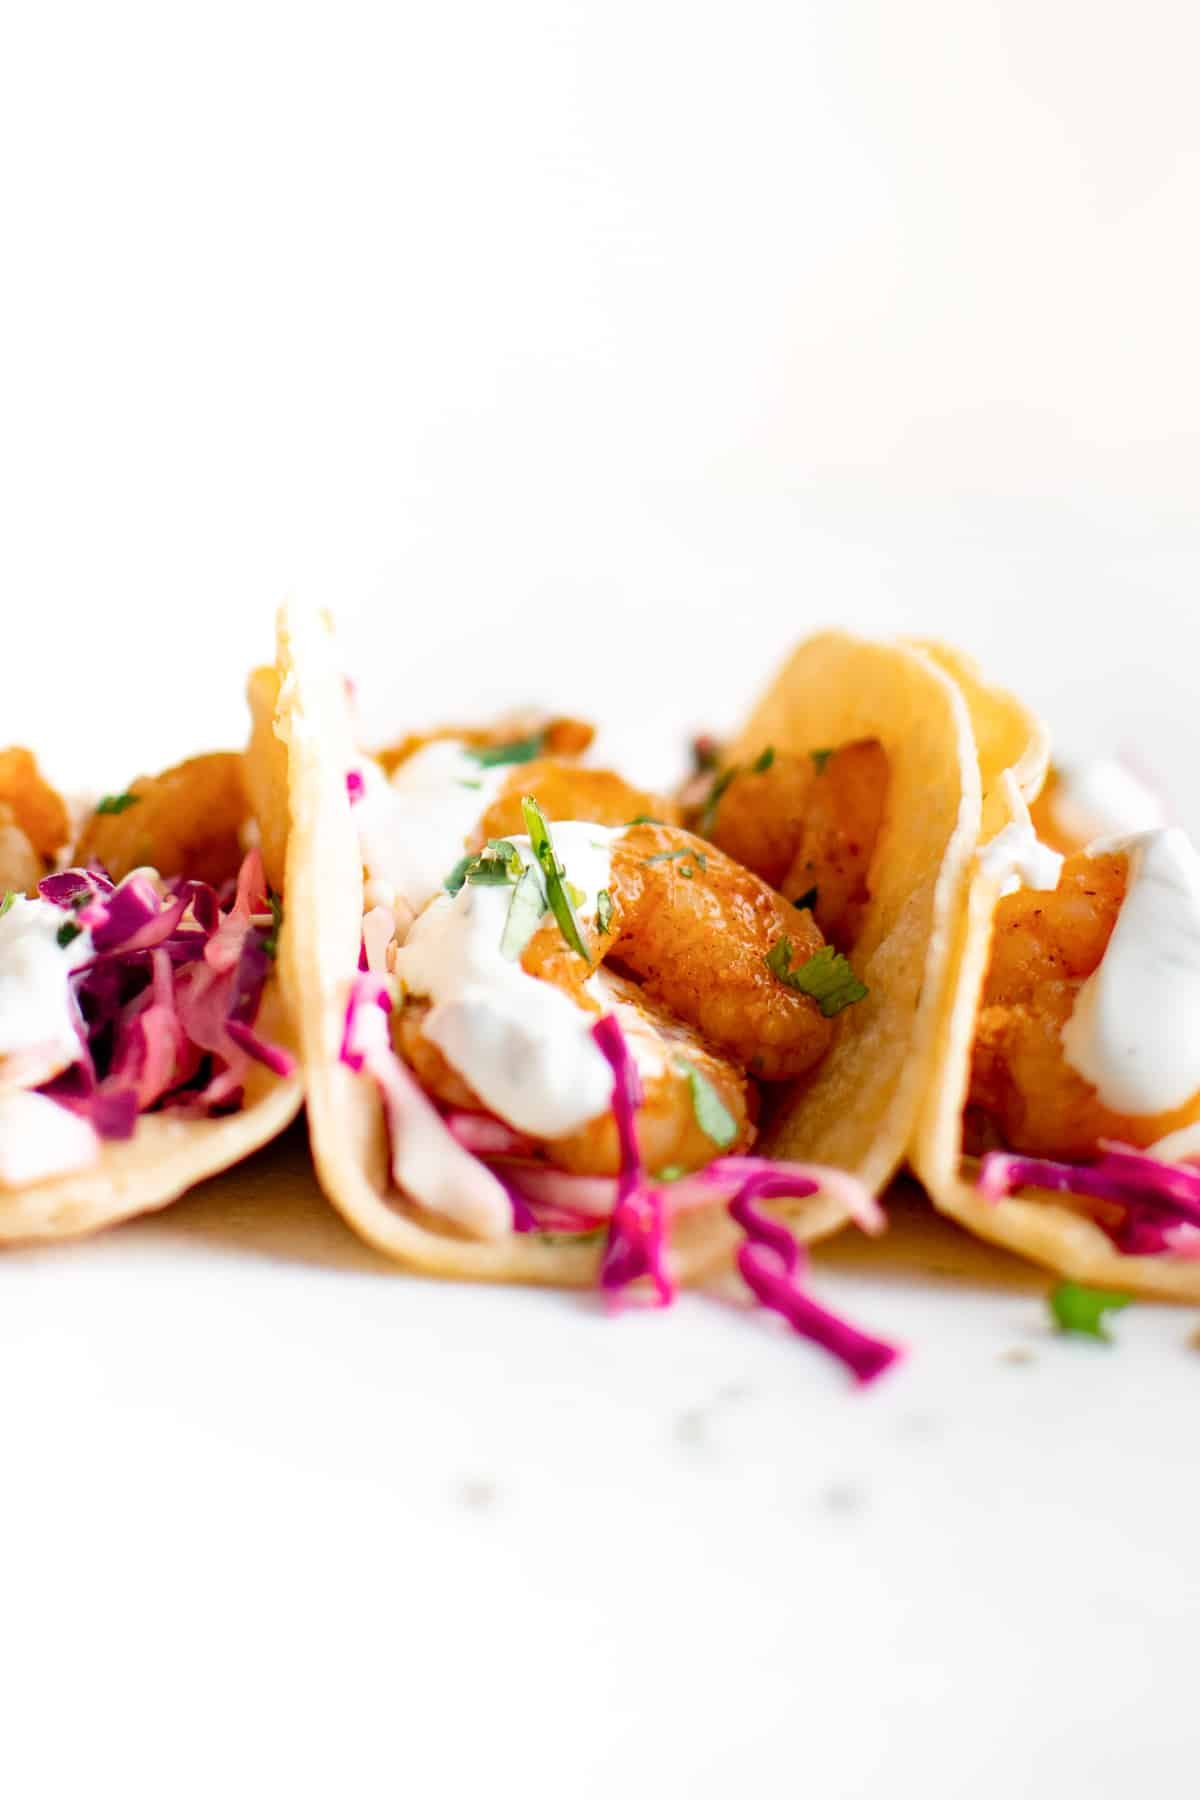 Corn tortillas topped with cabbage slaw, shrimp, and creamy shrimp taco sauce.